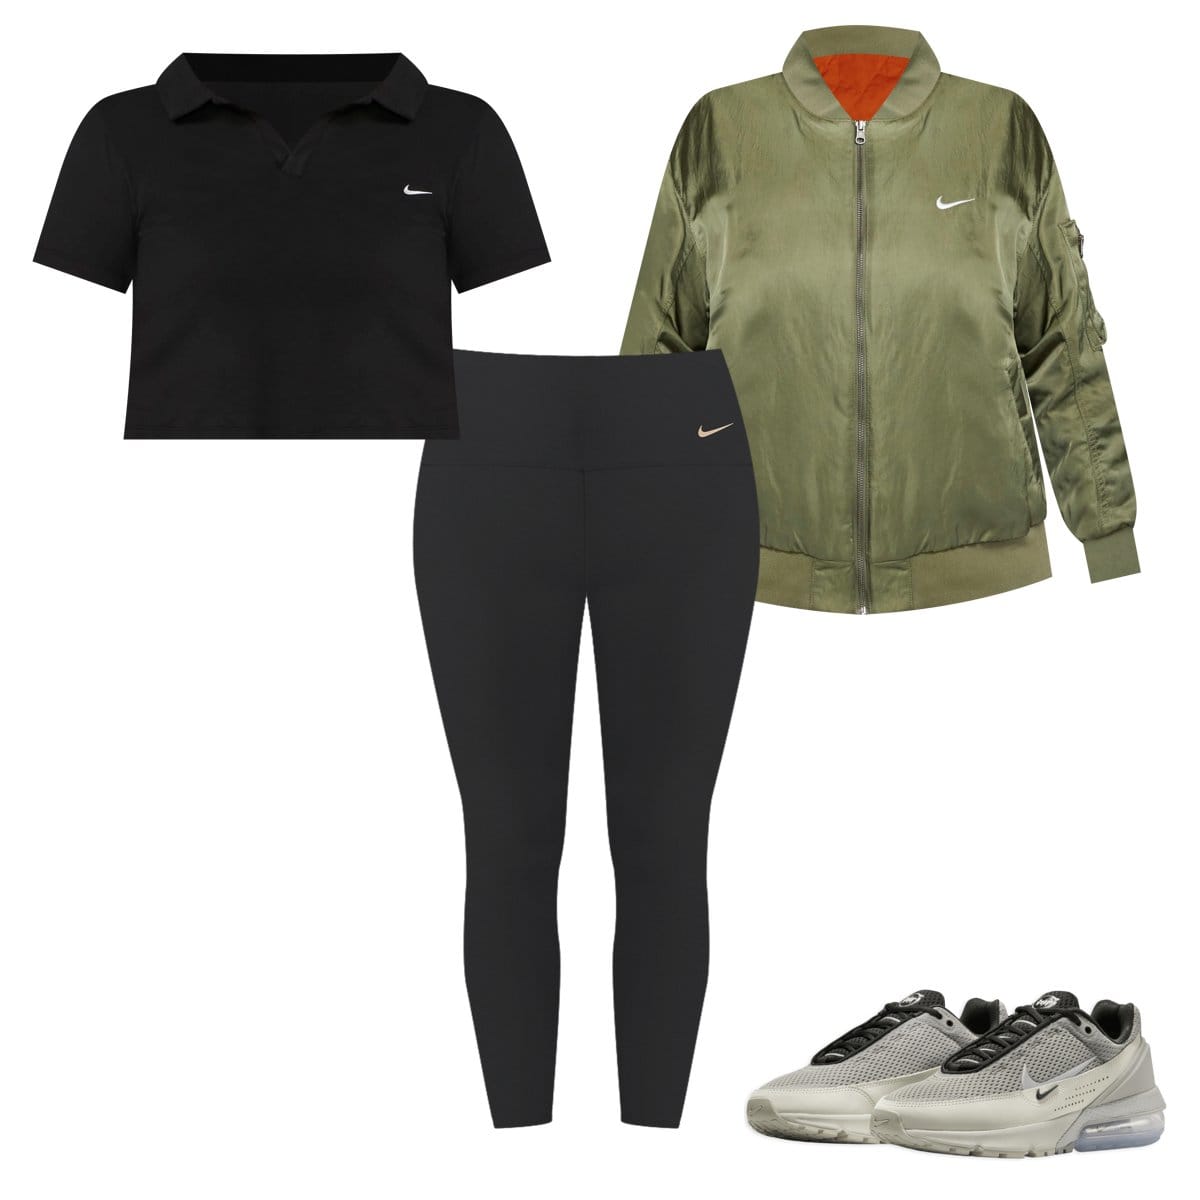 How to style grey nike pro leggings. #foryou